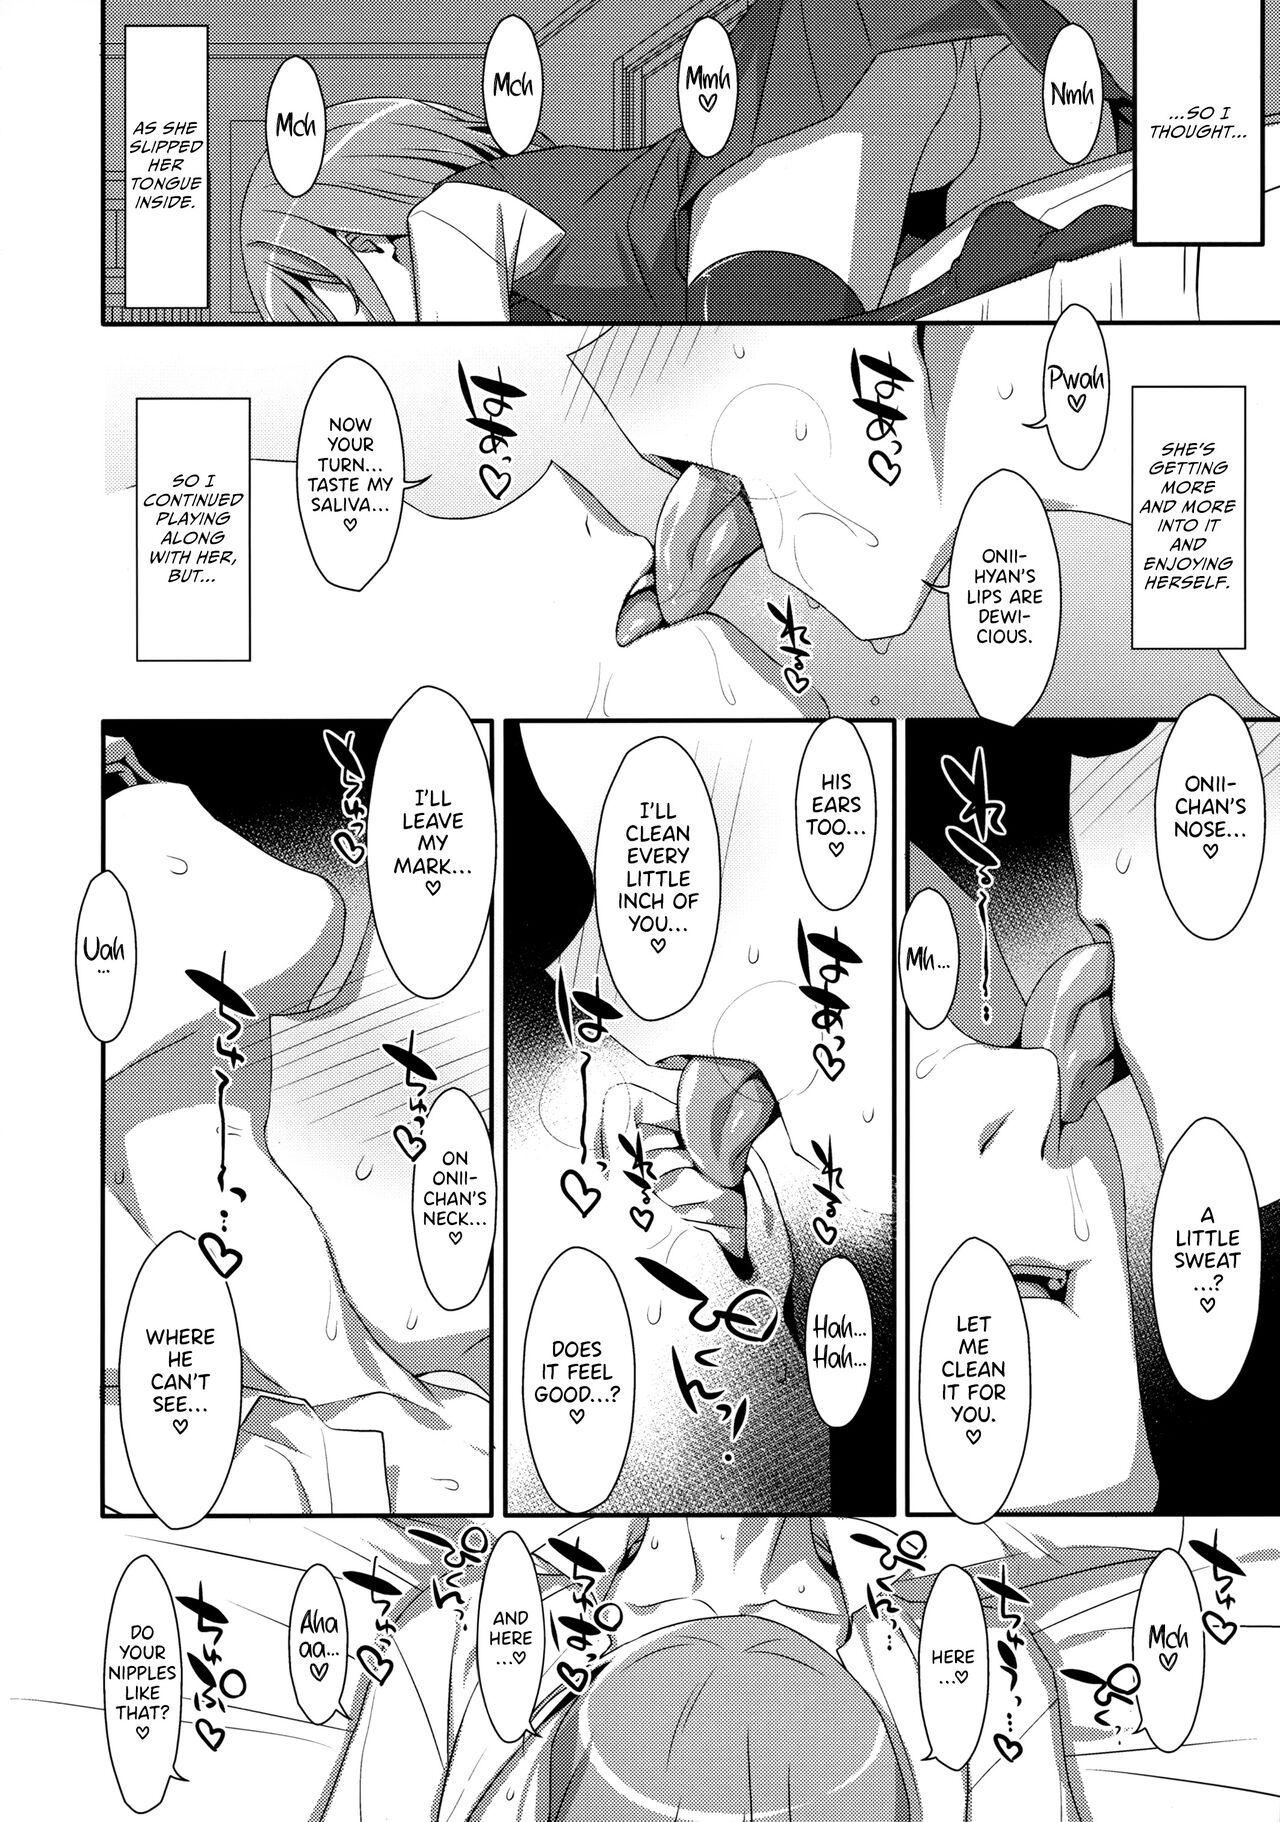 Putinha I Want to Do Lots of Things With My Sleeping Onii-chan! - Original Cheerleader - Page 6